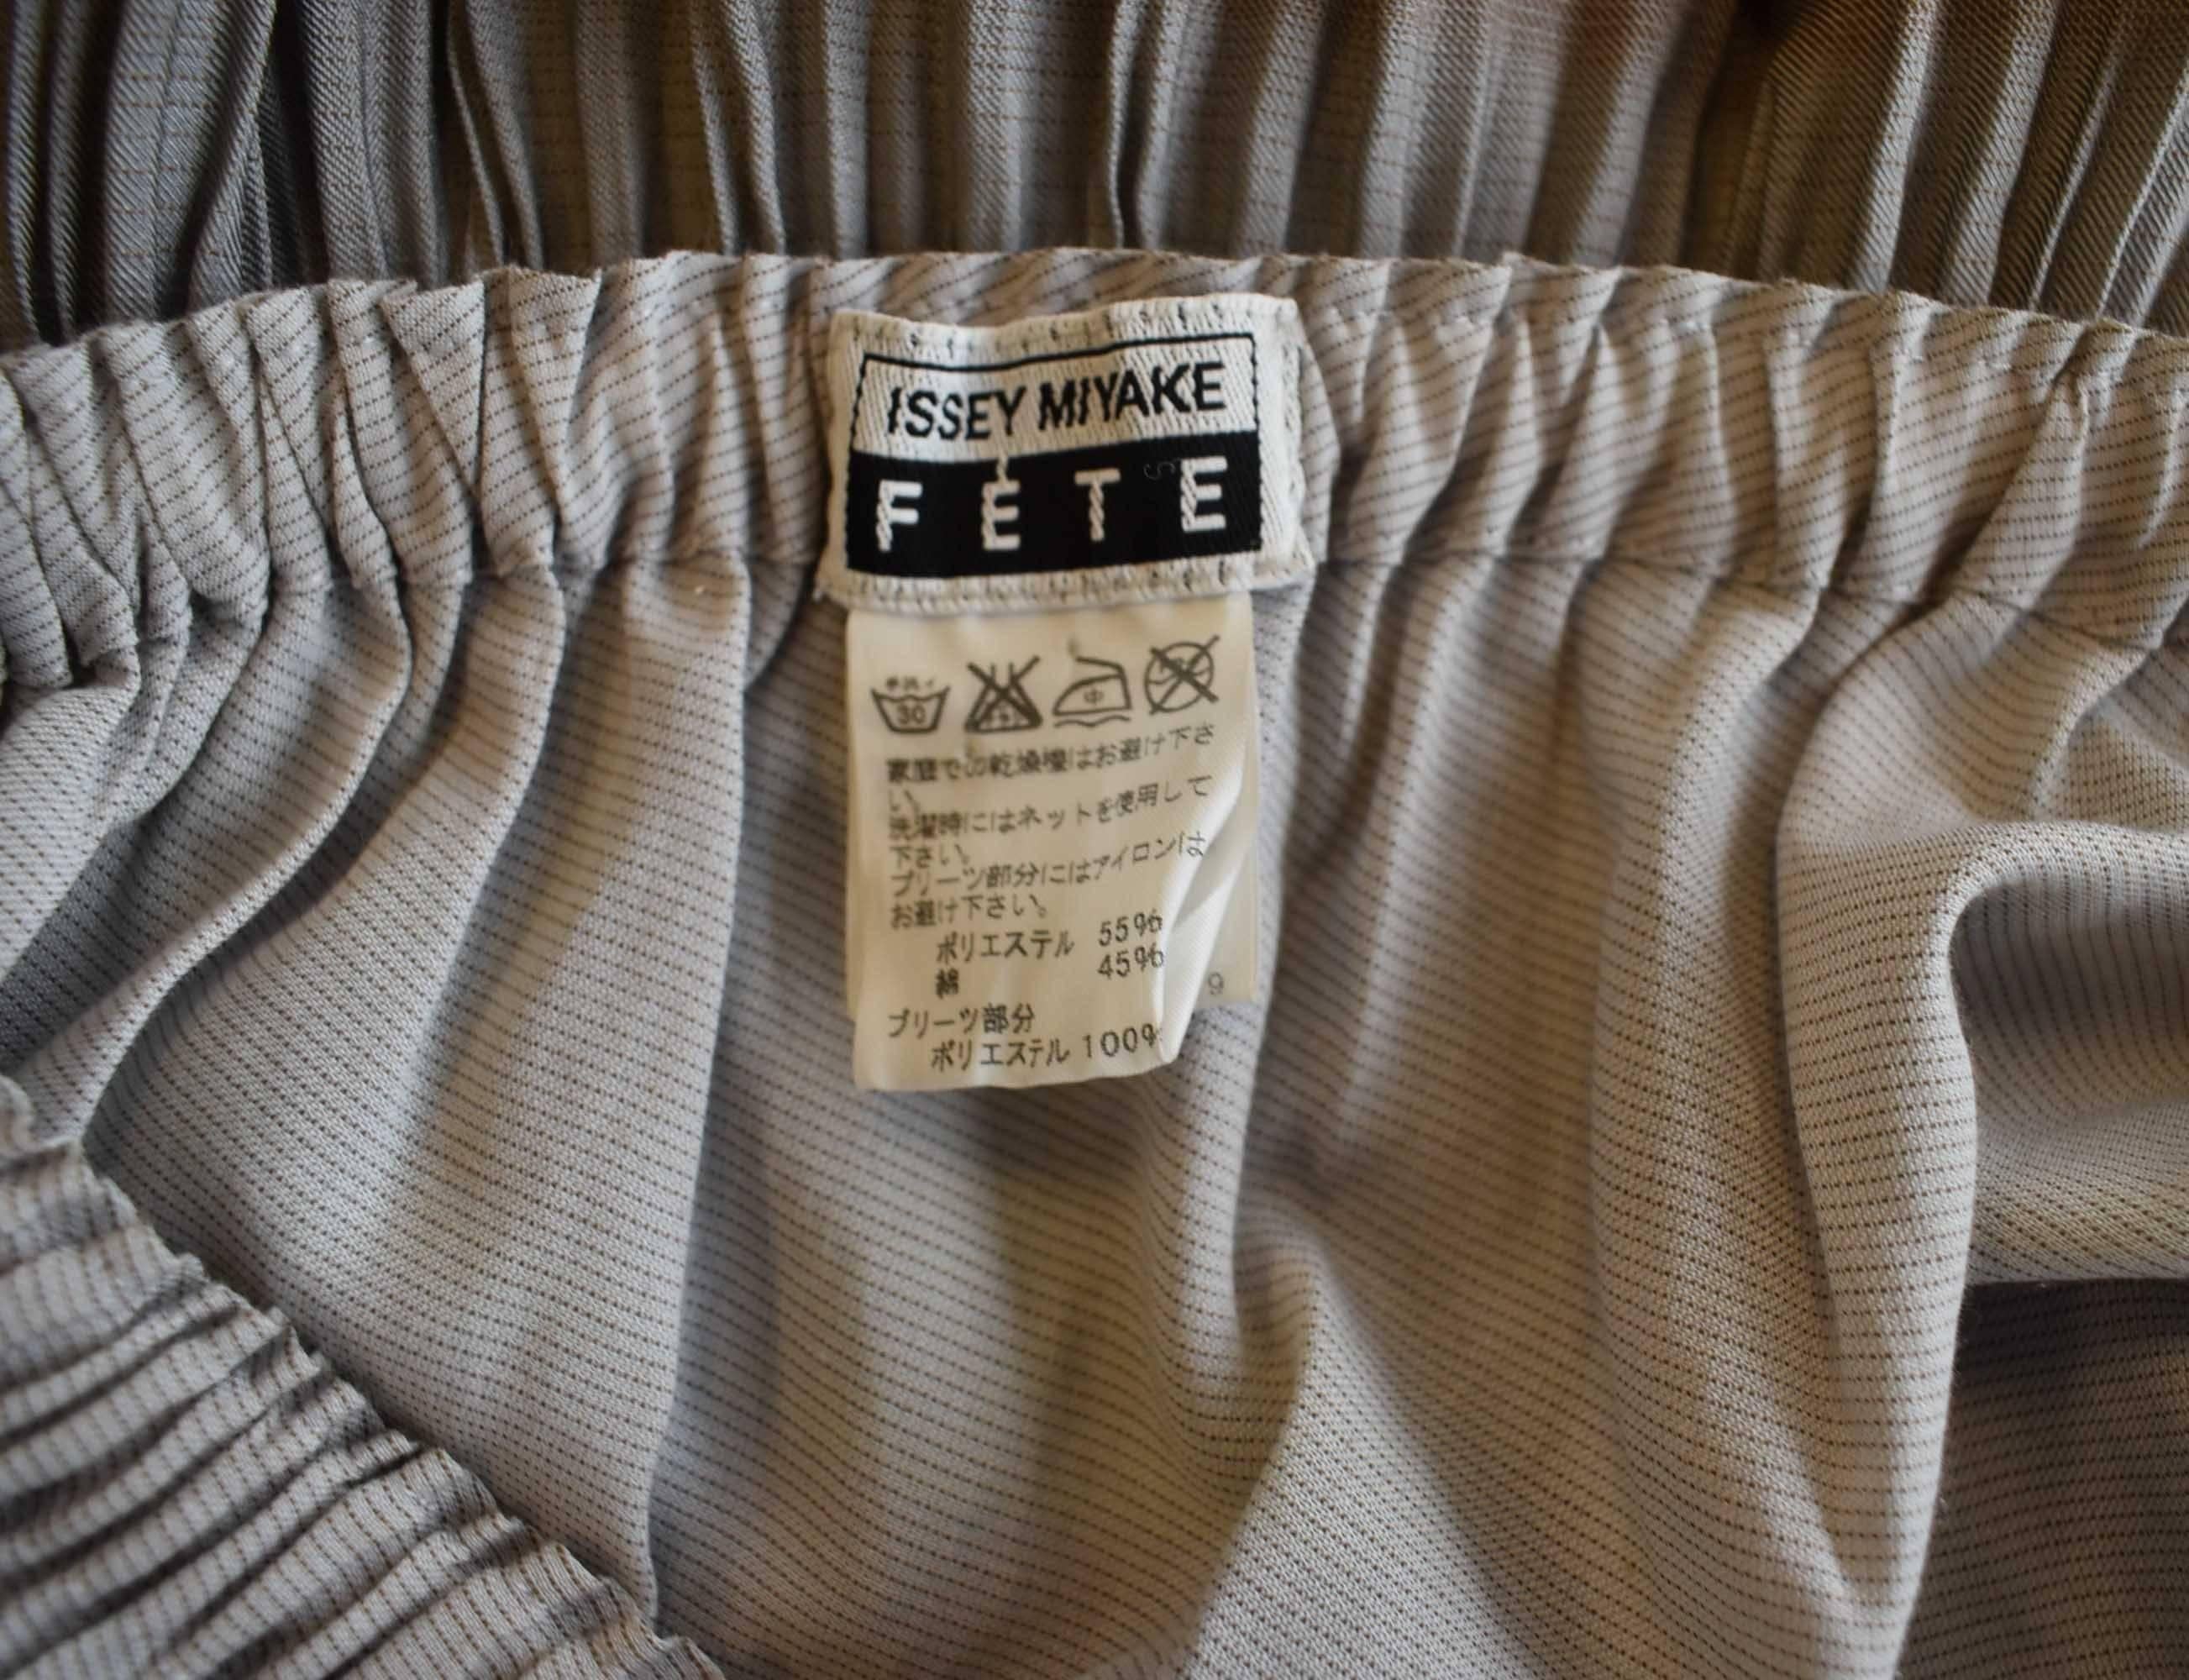 Issey Miyake FETE, Grey and Brown Asymmetric Pleated Dress with Adjustable Strap In Excellent Condition For Sale In London, GB